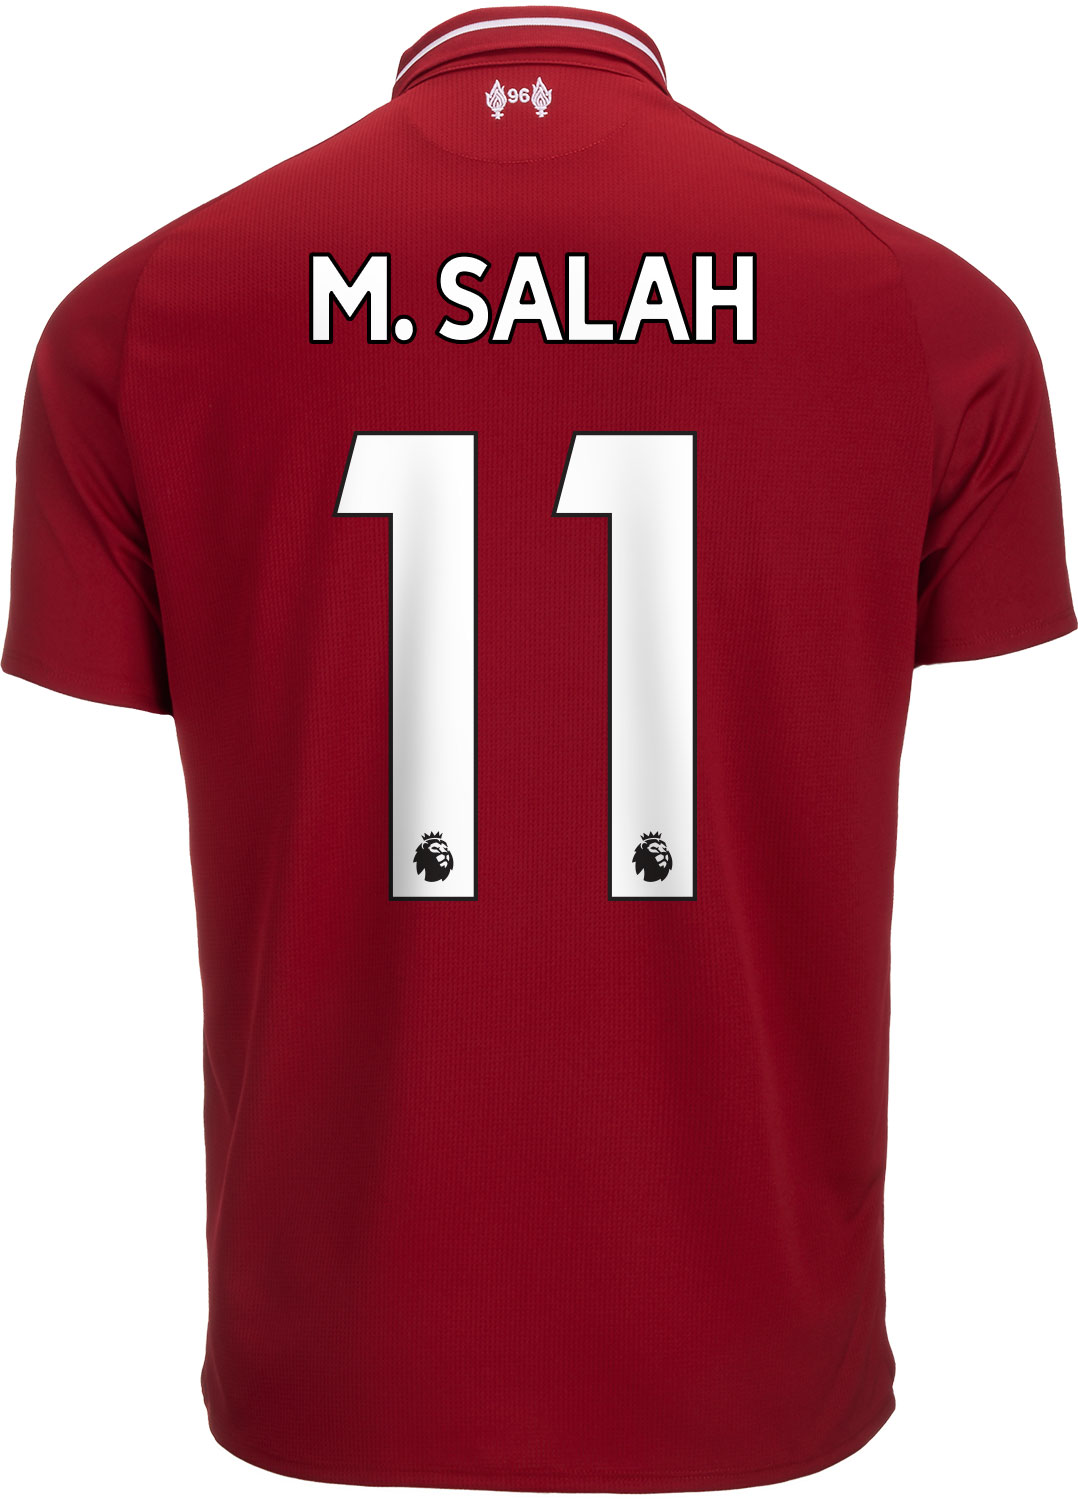 mohamed salah youth jersey